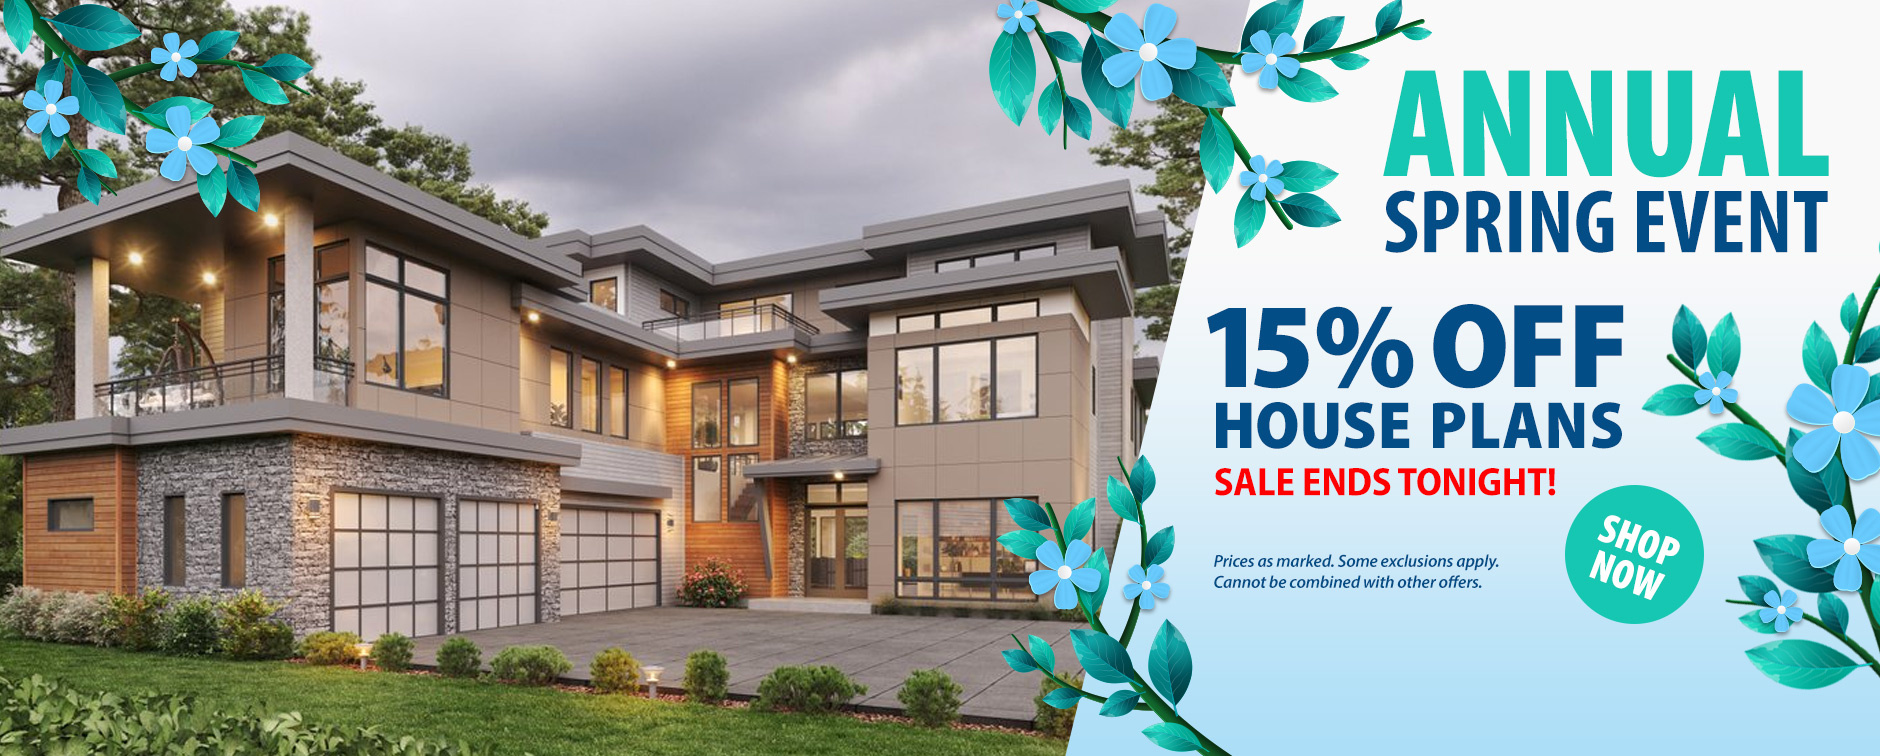 Get 15% Off Dream House Plans - Farmhouse, Modern, More - Offer Ends Tonight